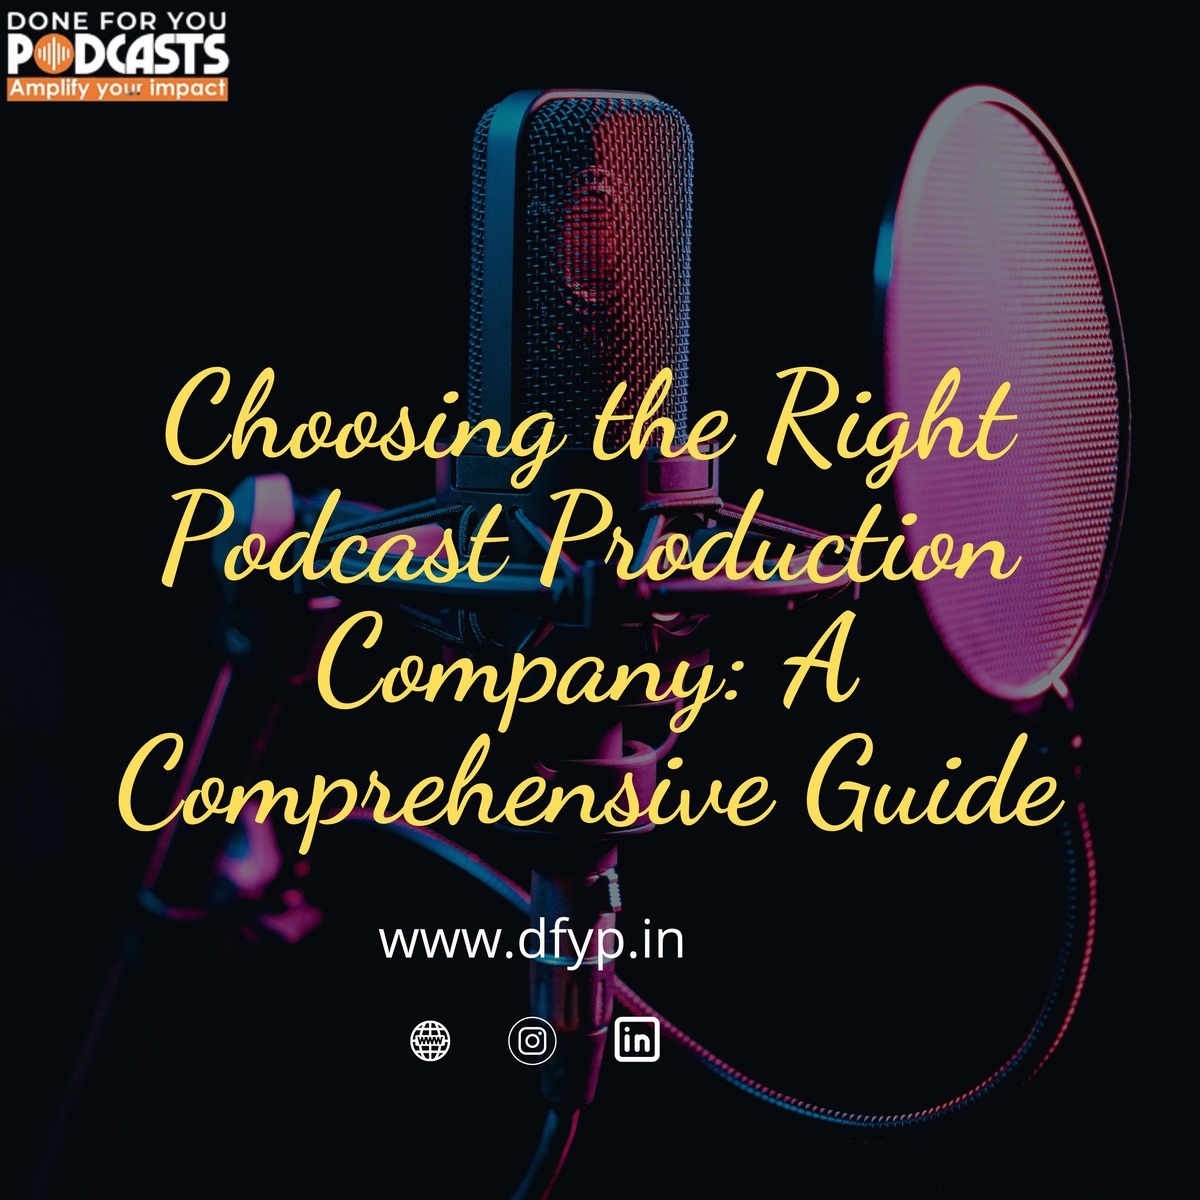 Choosing the Right Podcast Production Company: A Comprehensive Guide